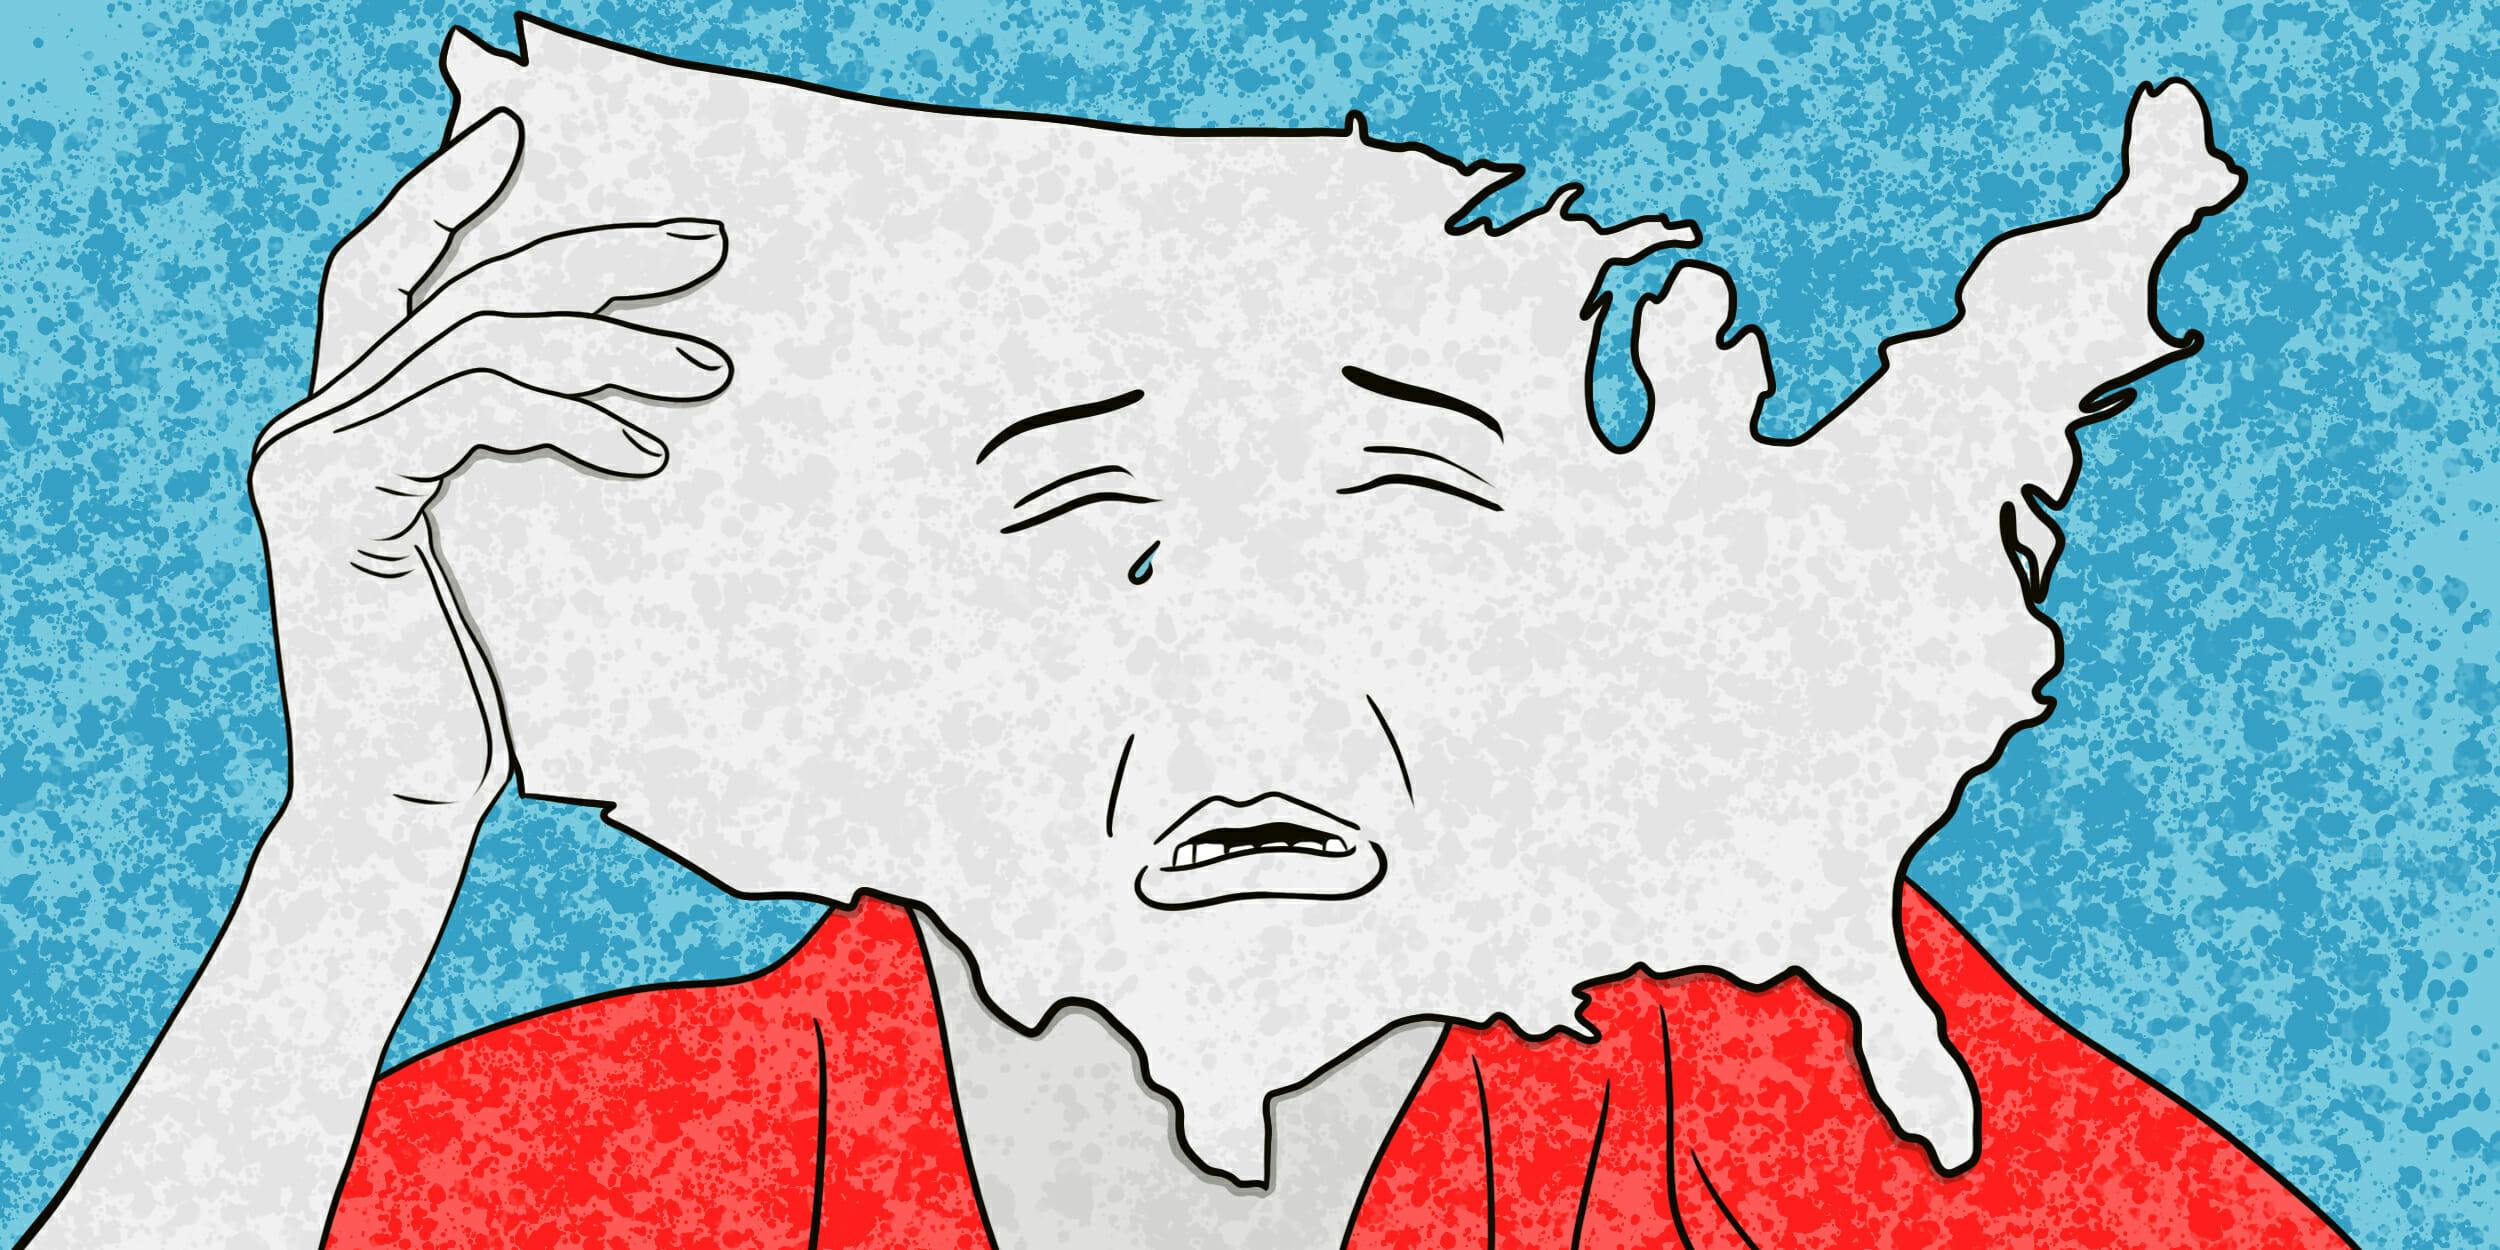 Shape of the United States as a head with a sad face